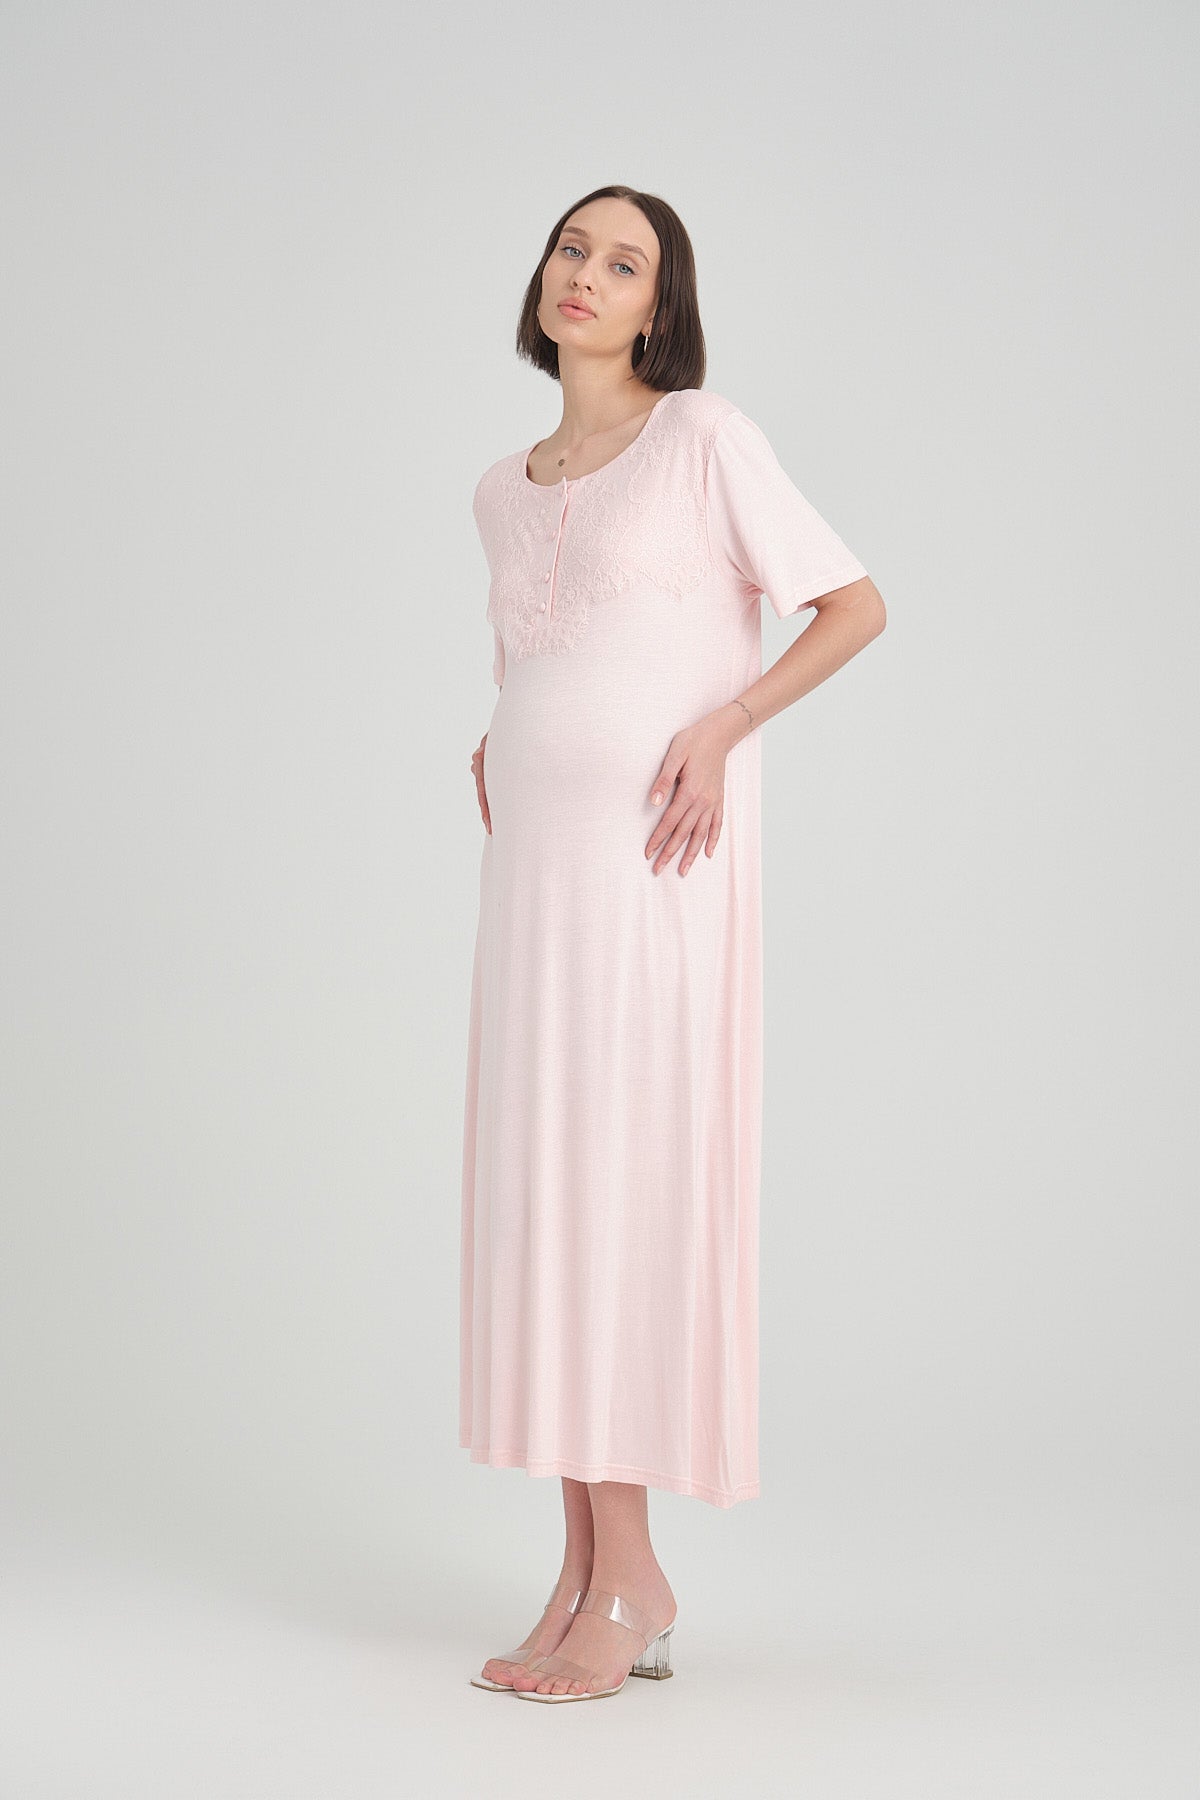 Shopymommy 2402 Lace Maternity & Nursing Nightgown With Embroidered Robe Pink